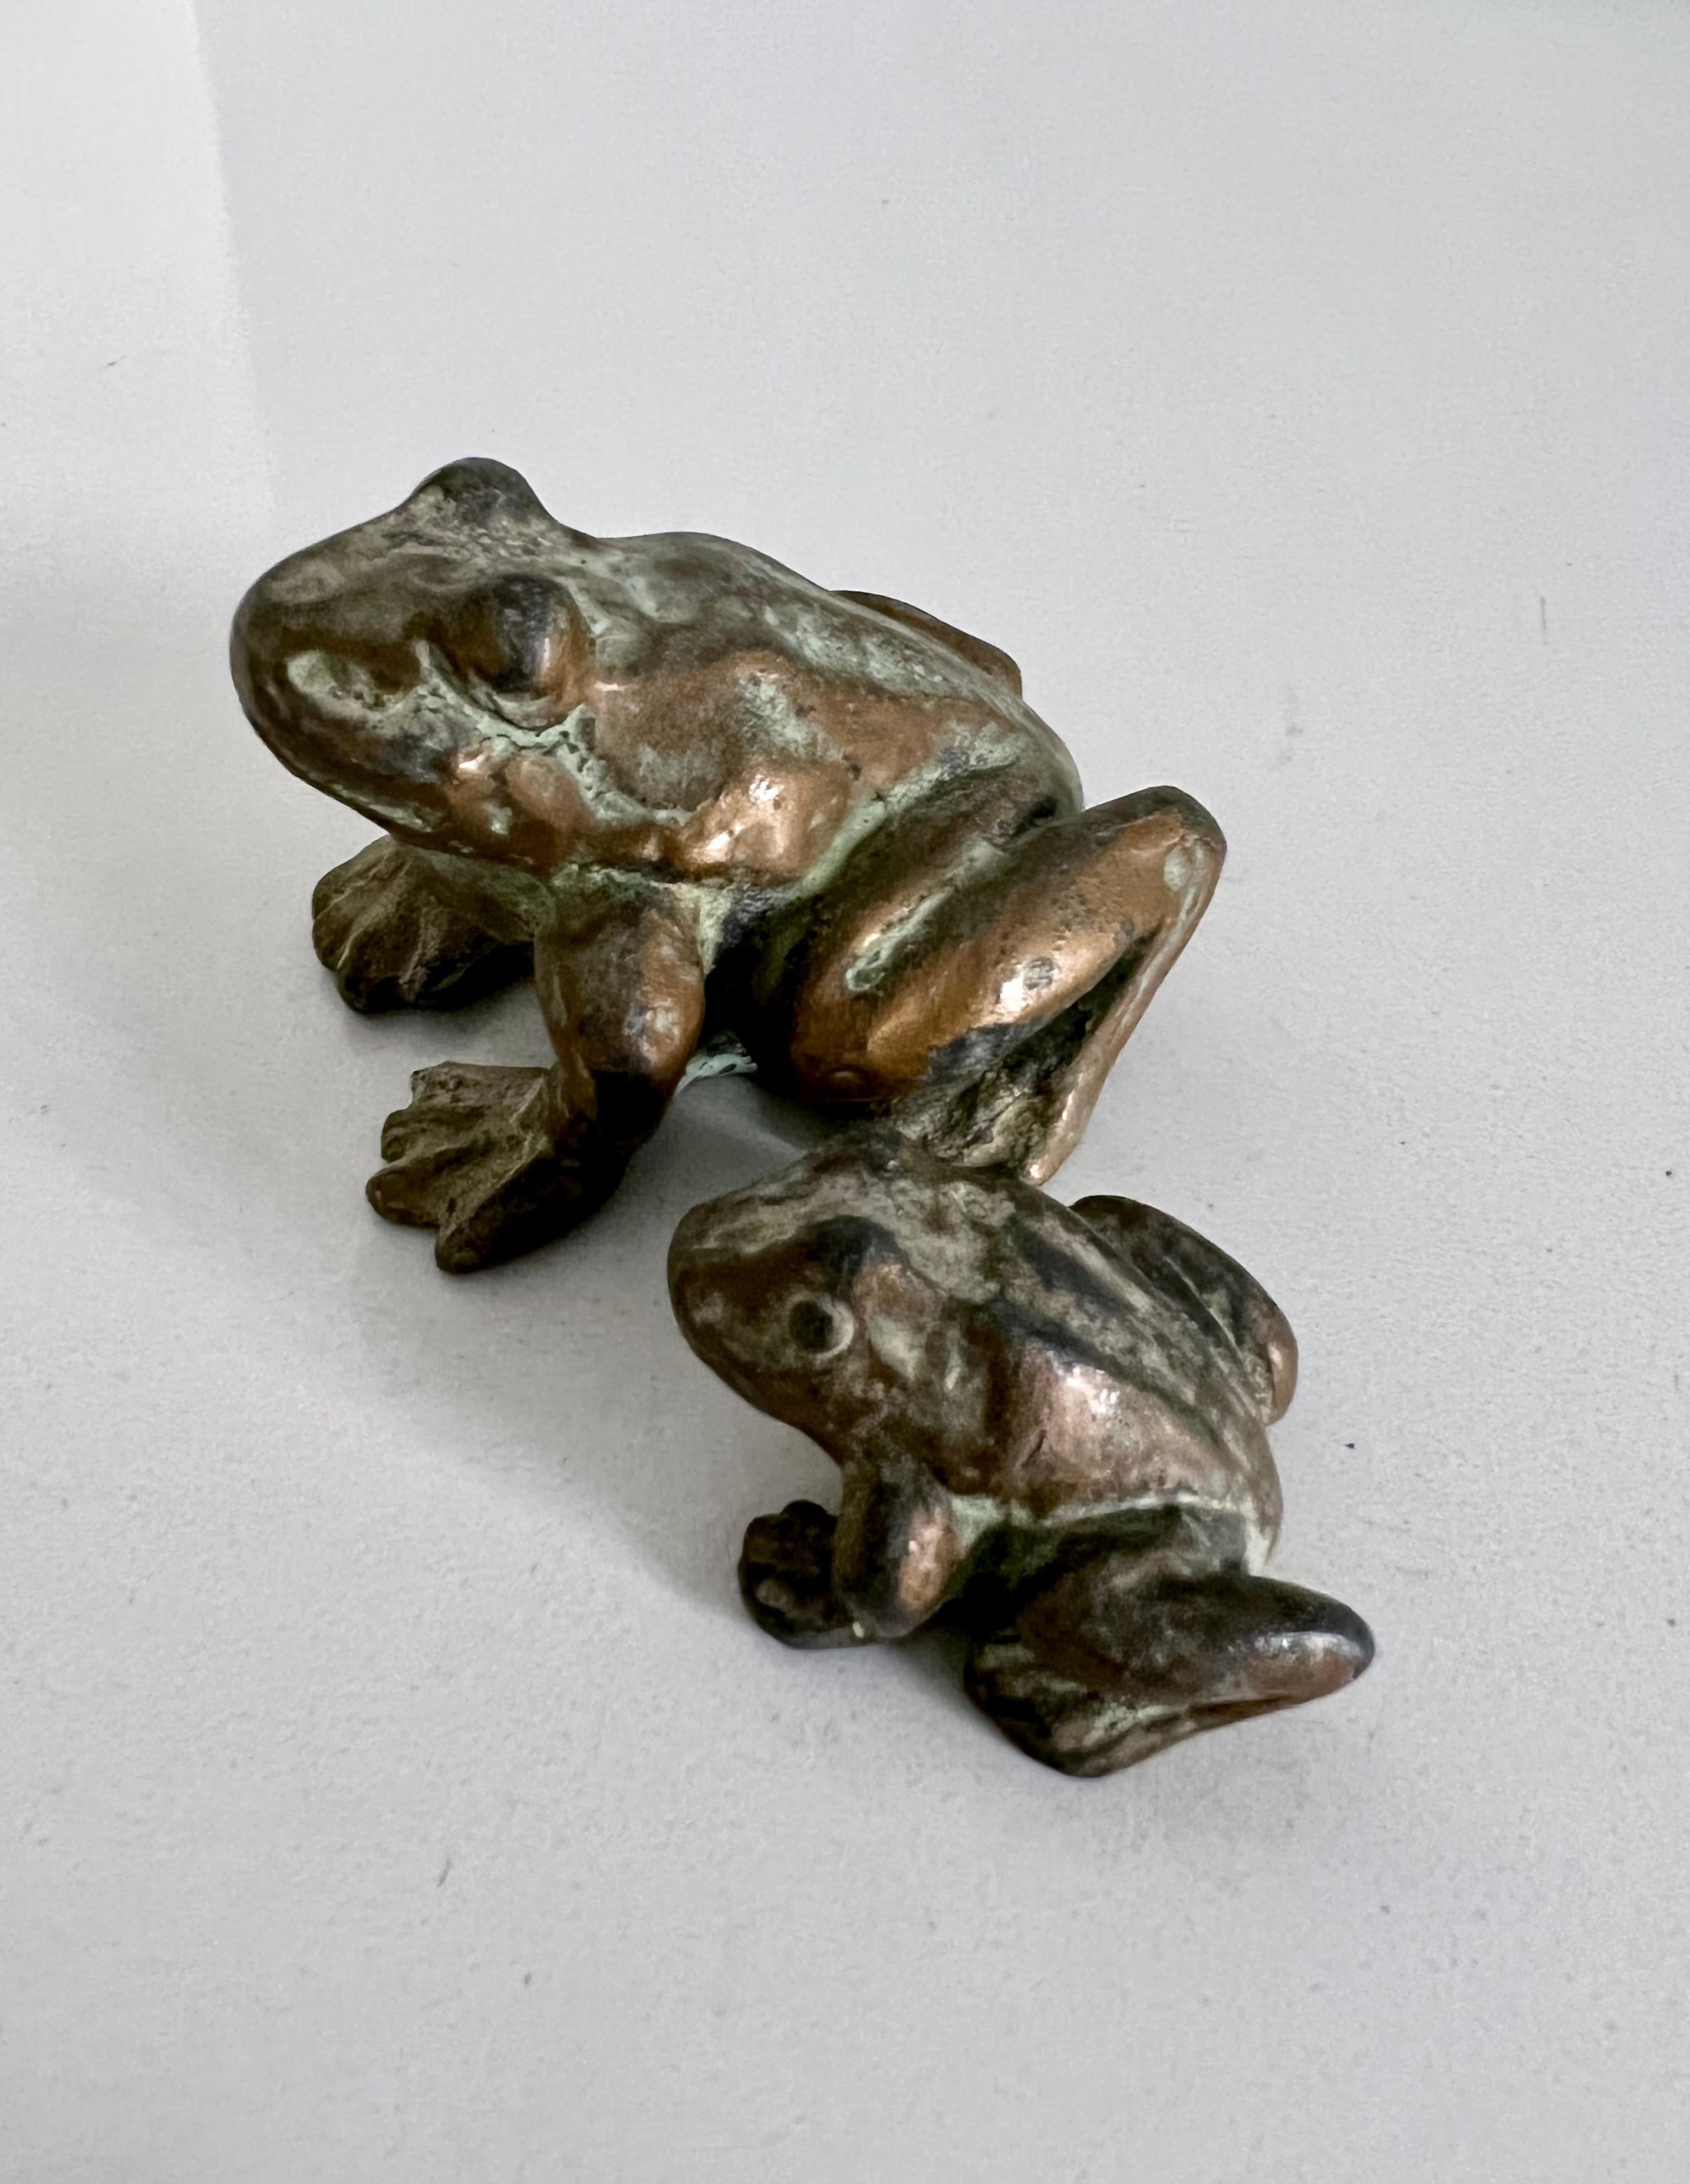 Pair of bronze frogs or toads. Wonderful indoor or outdoor or as a personal totem. 

Measures: Larger frog 3